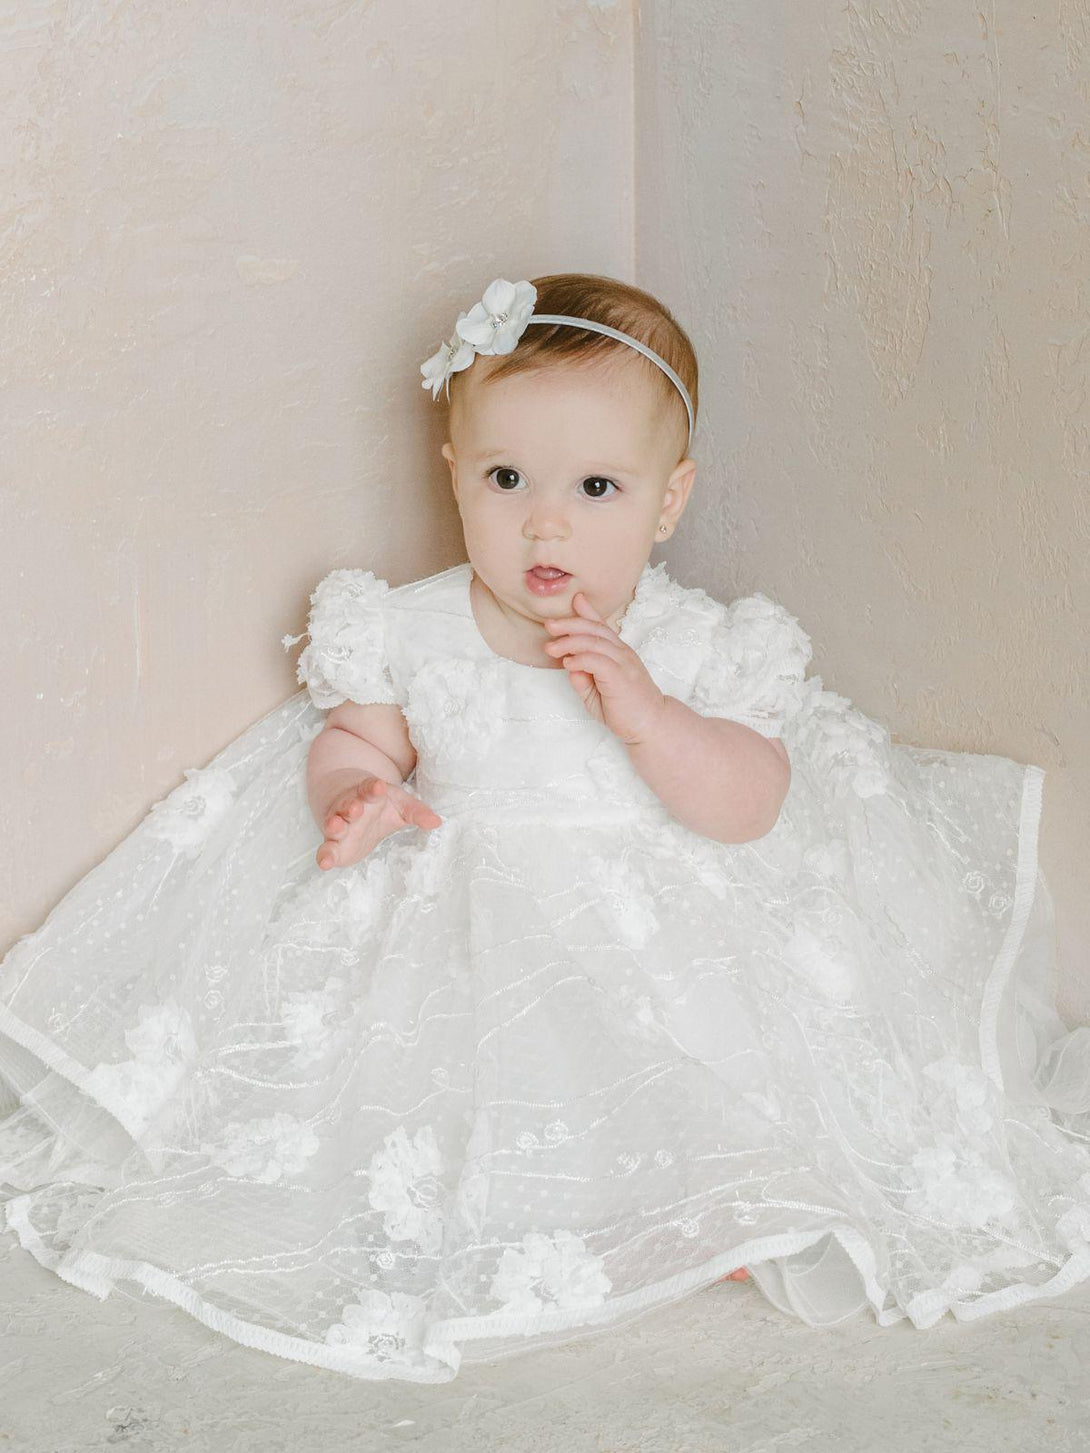 TETER WARM Baptism First Birthday Flower Lace Princess Dress in New York